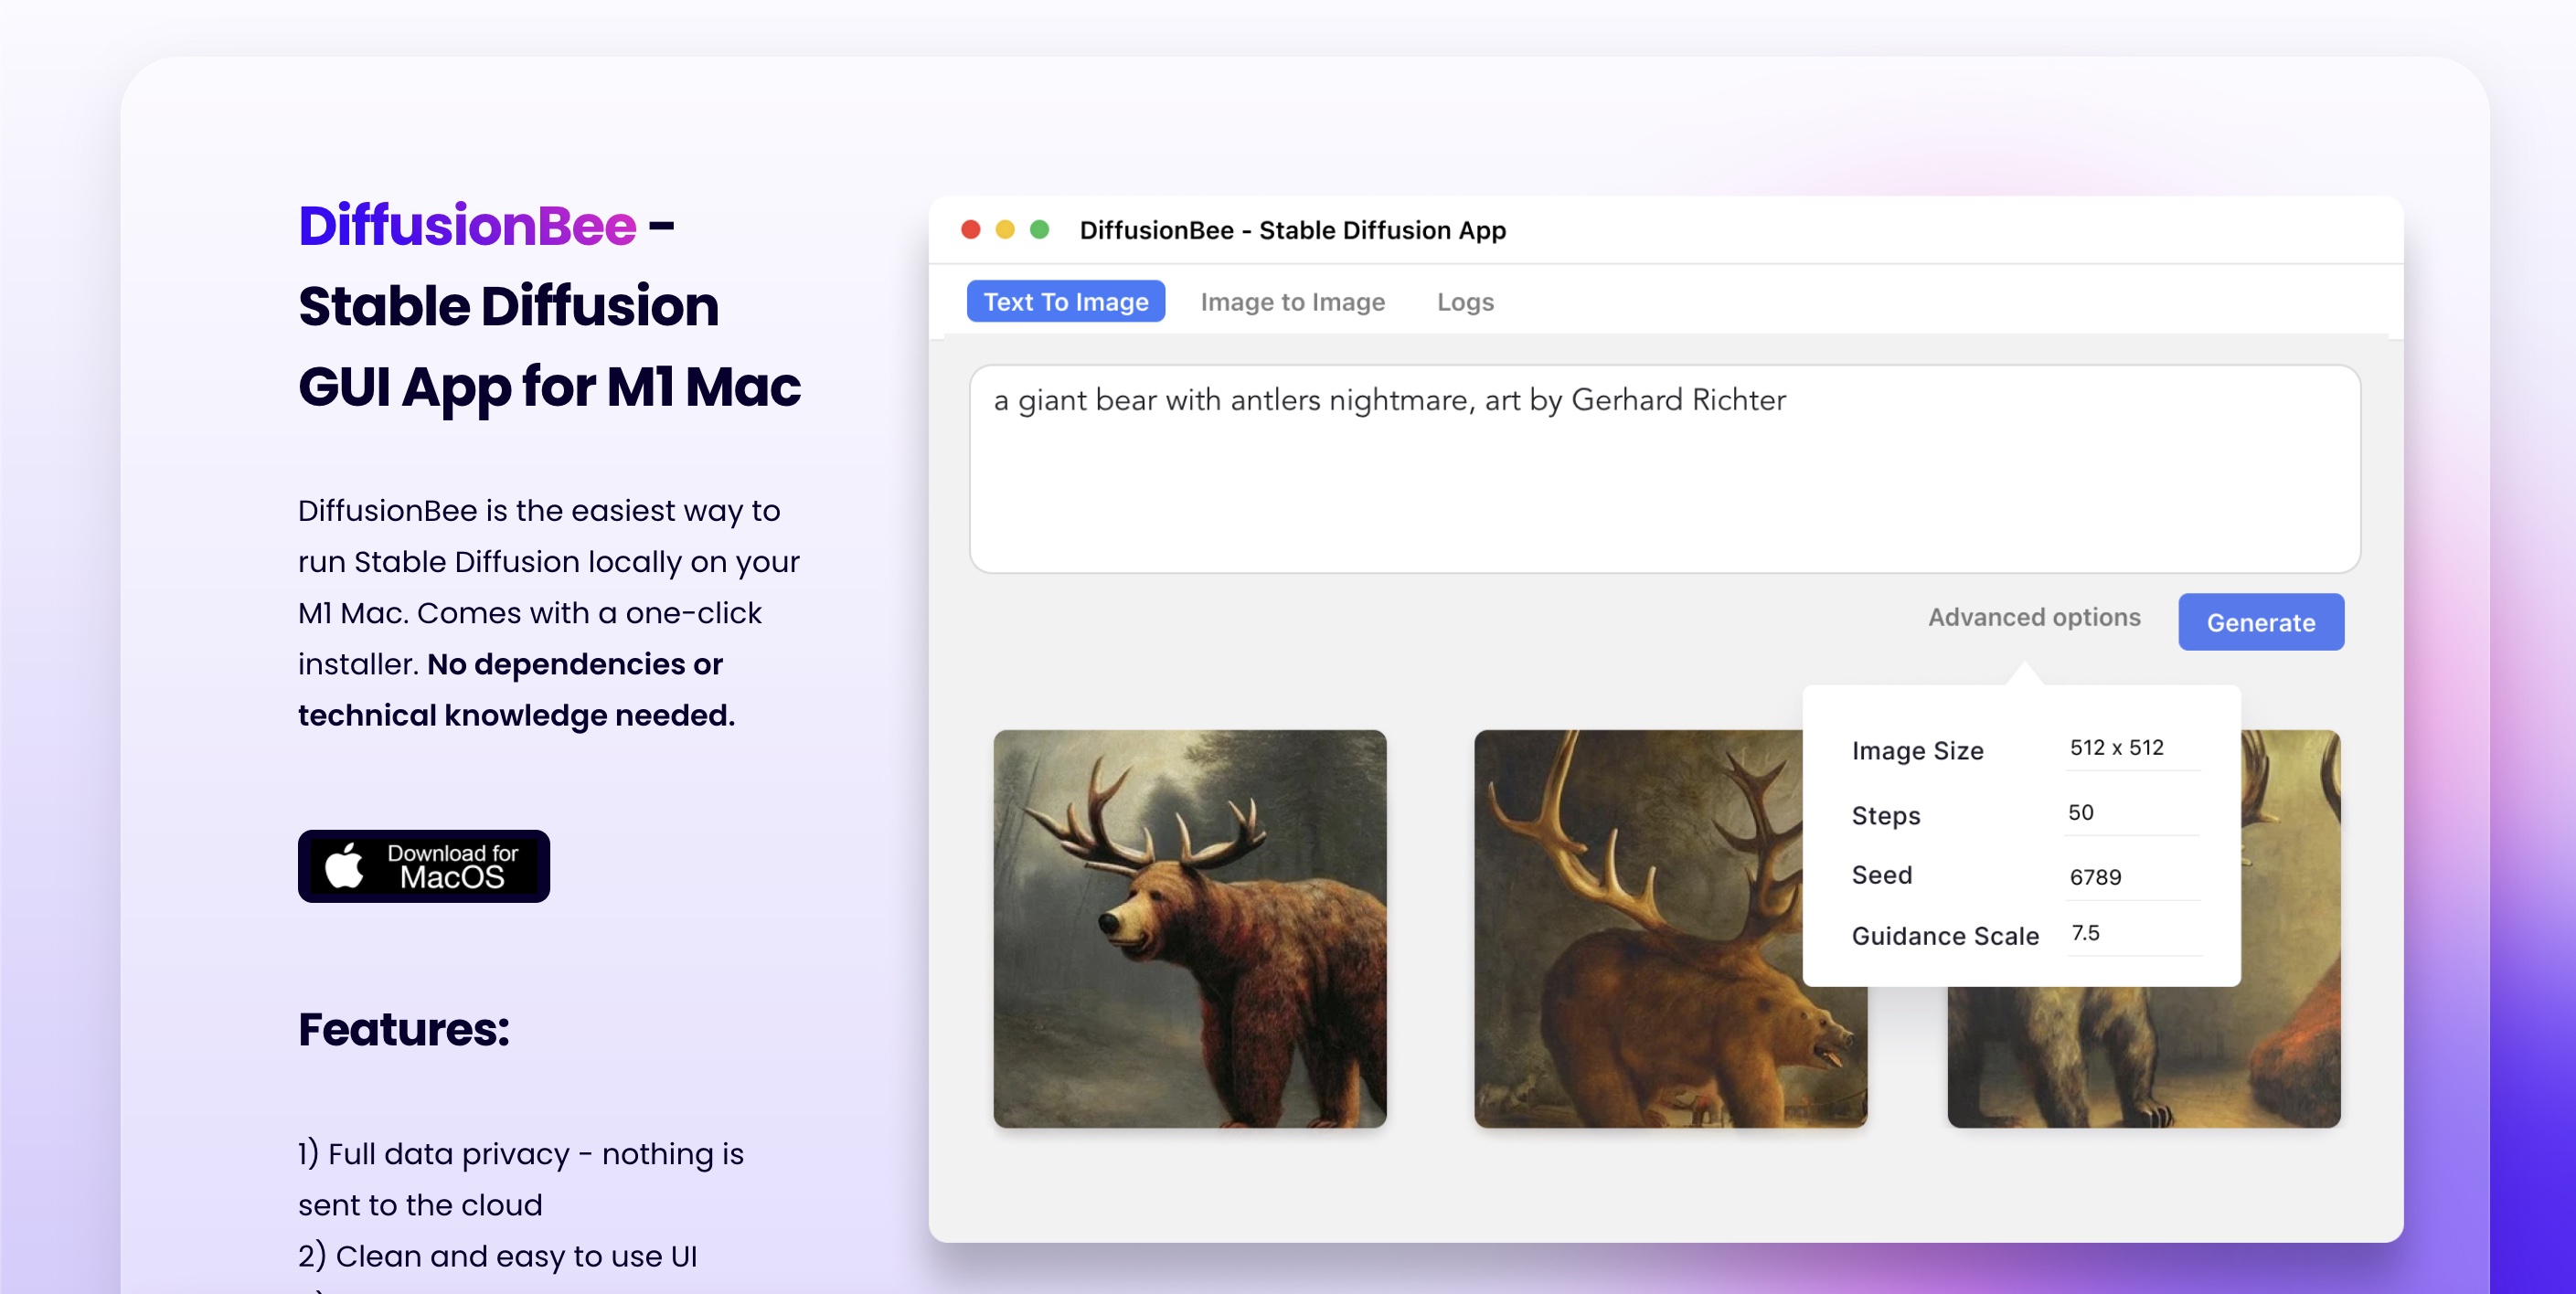 DiffusionBee - Stable Diffusion user-interface for Mac users